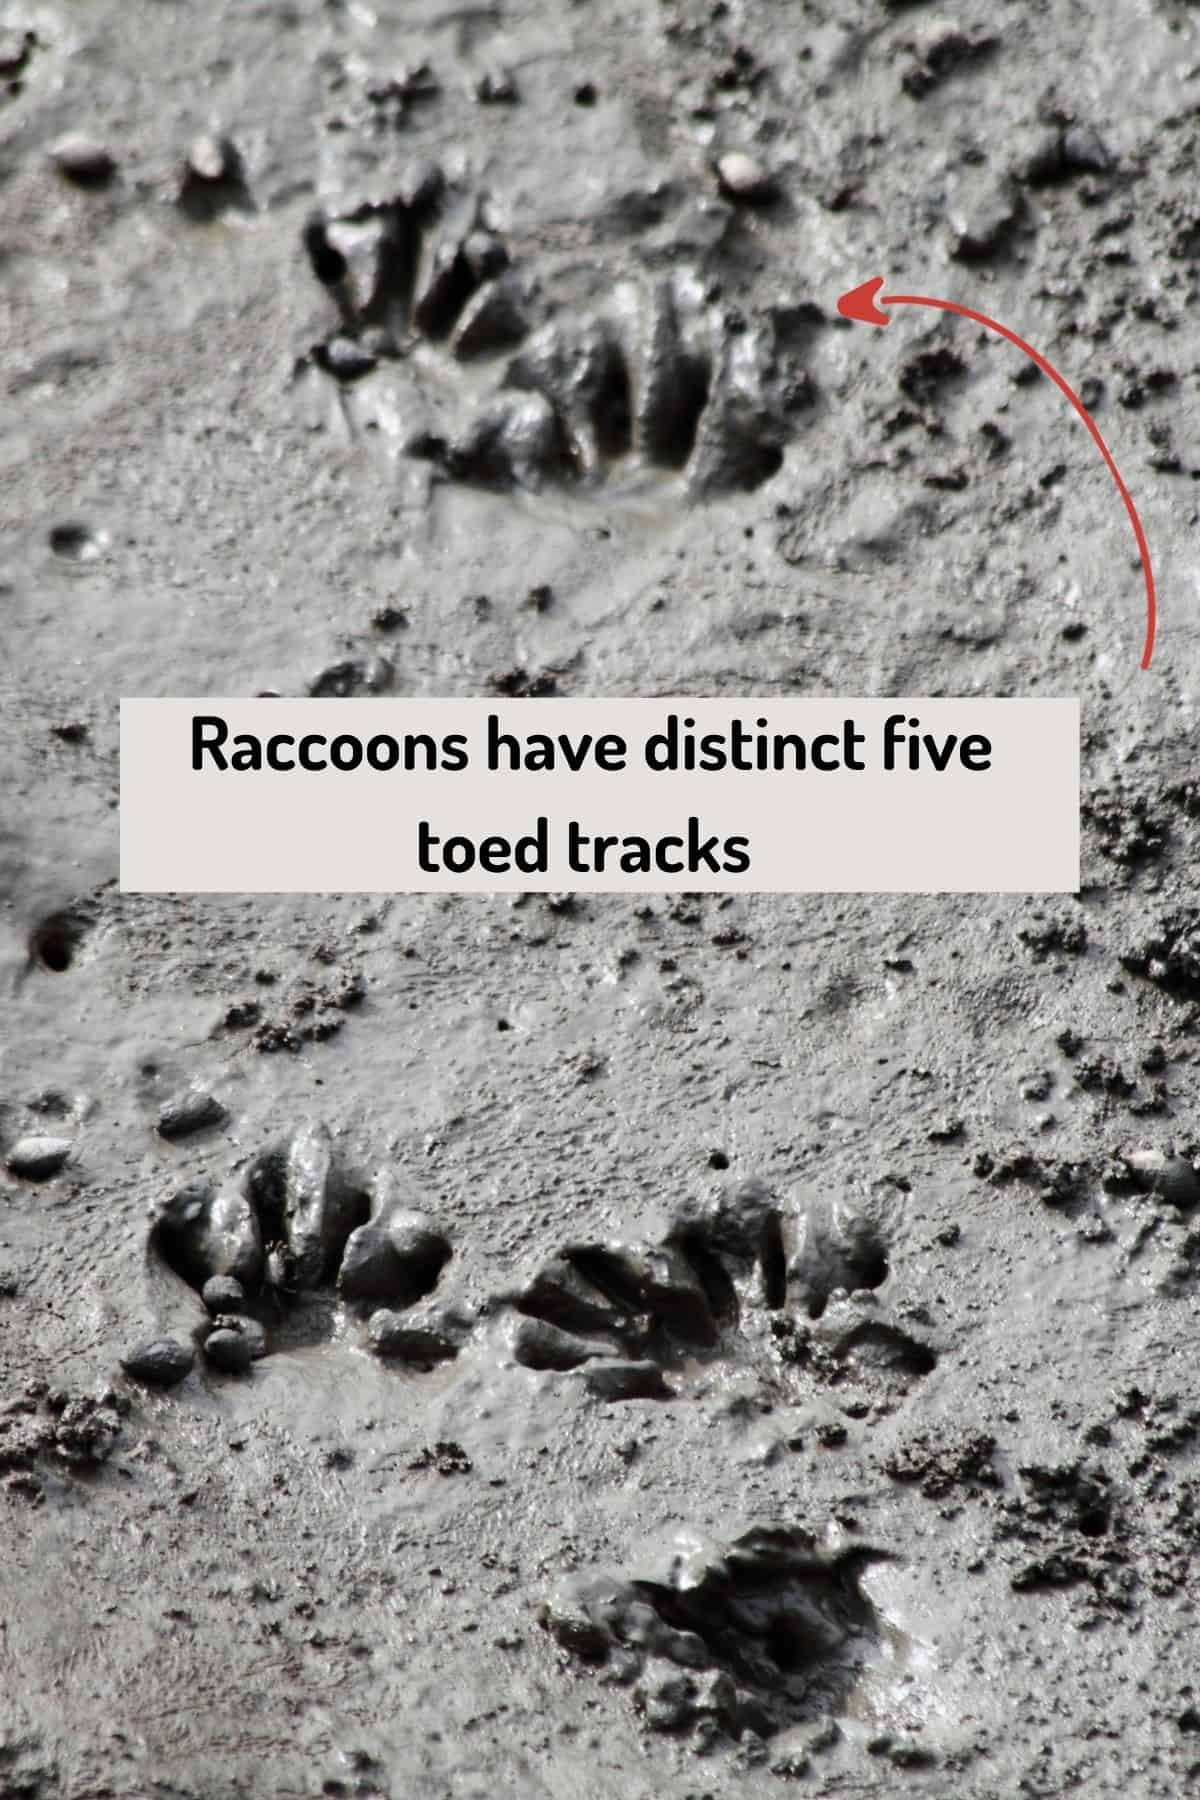 Picture of raccoon tracks with text overlay and arrow pointing to it